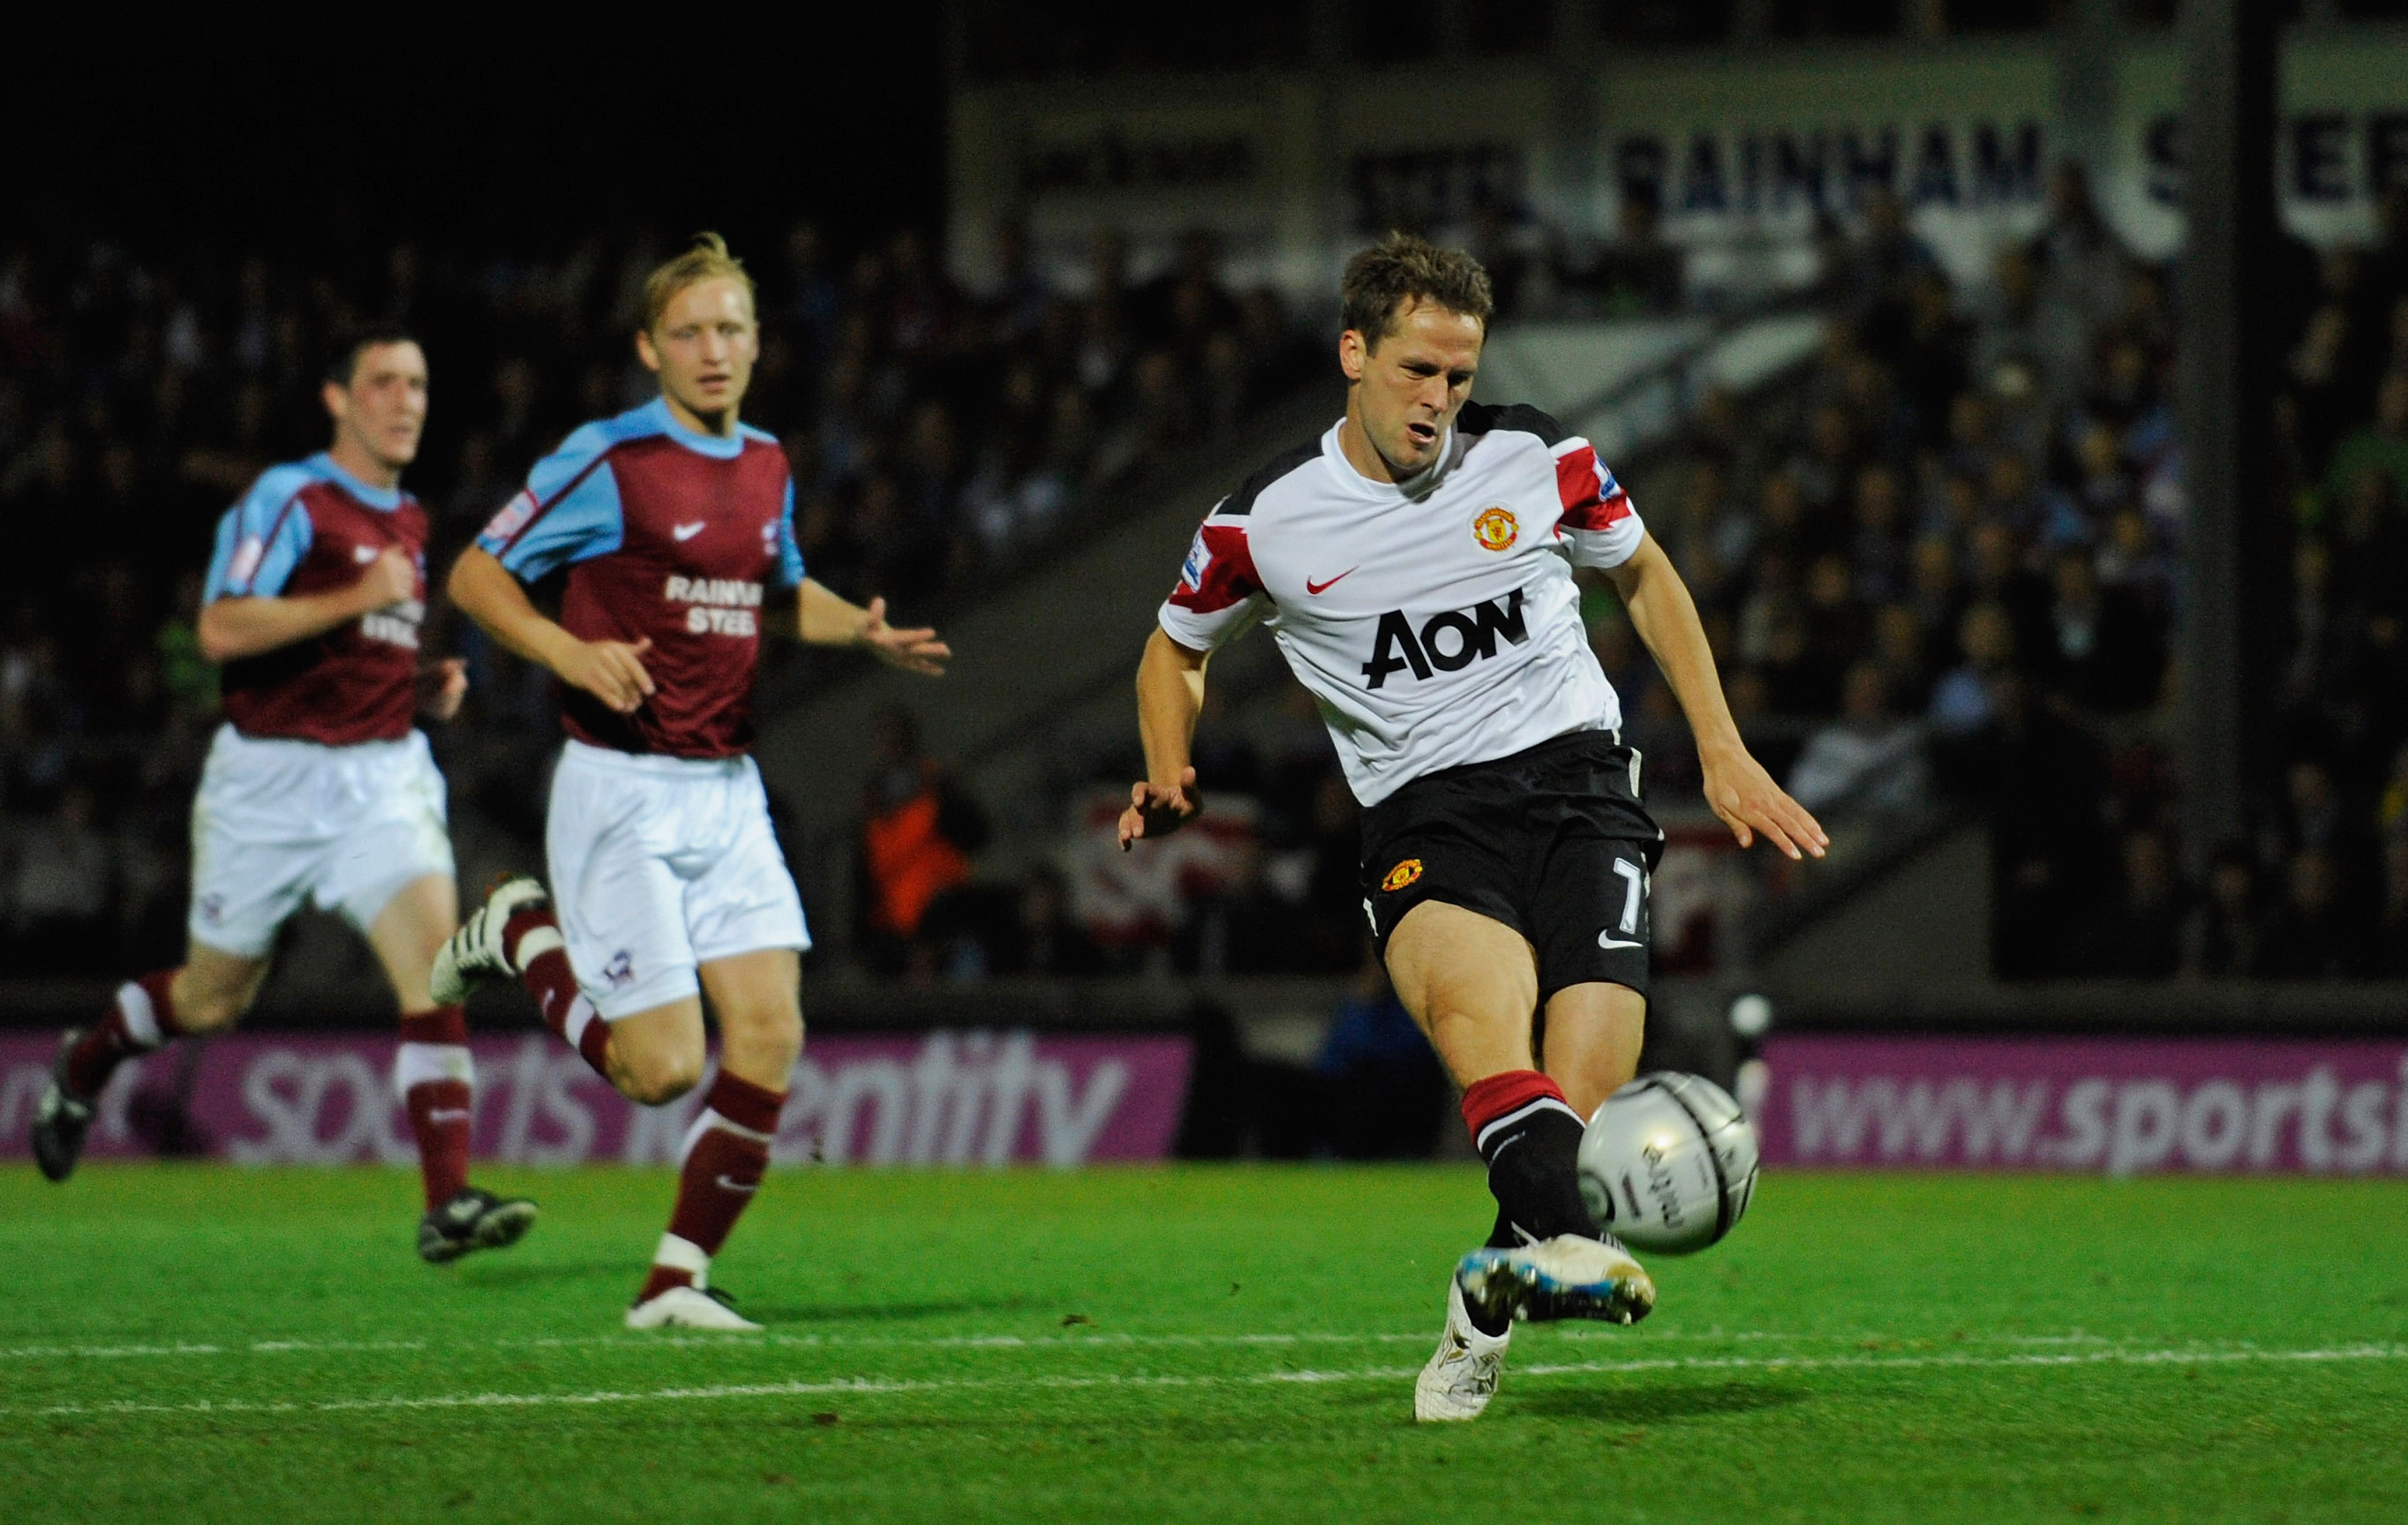 SCUNTHORPE, ENGLAND - SEPTEMBER 22: Michael Owen of Manchester United scores from the spot to make it 3-1 during the Carling Cup 3rd Round match between Scunthorpe United and Manchester United at Glanford Park on September 22, 2010 in Scunthorpe, England.